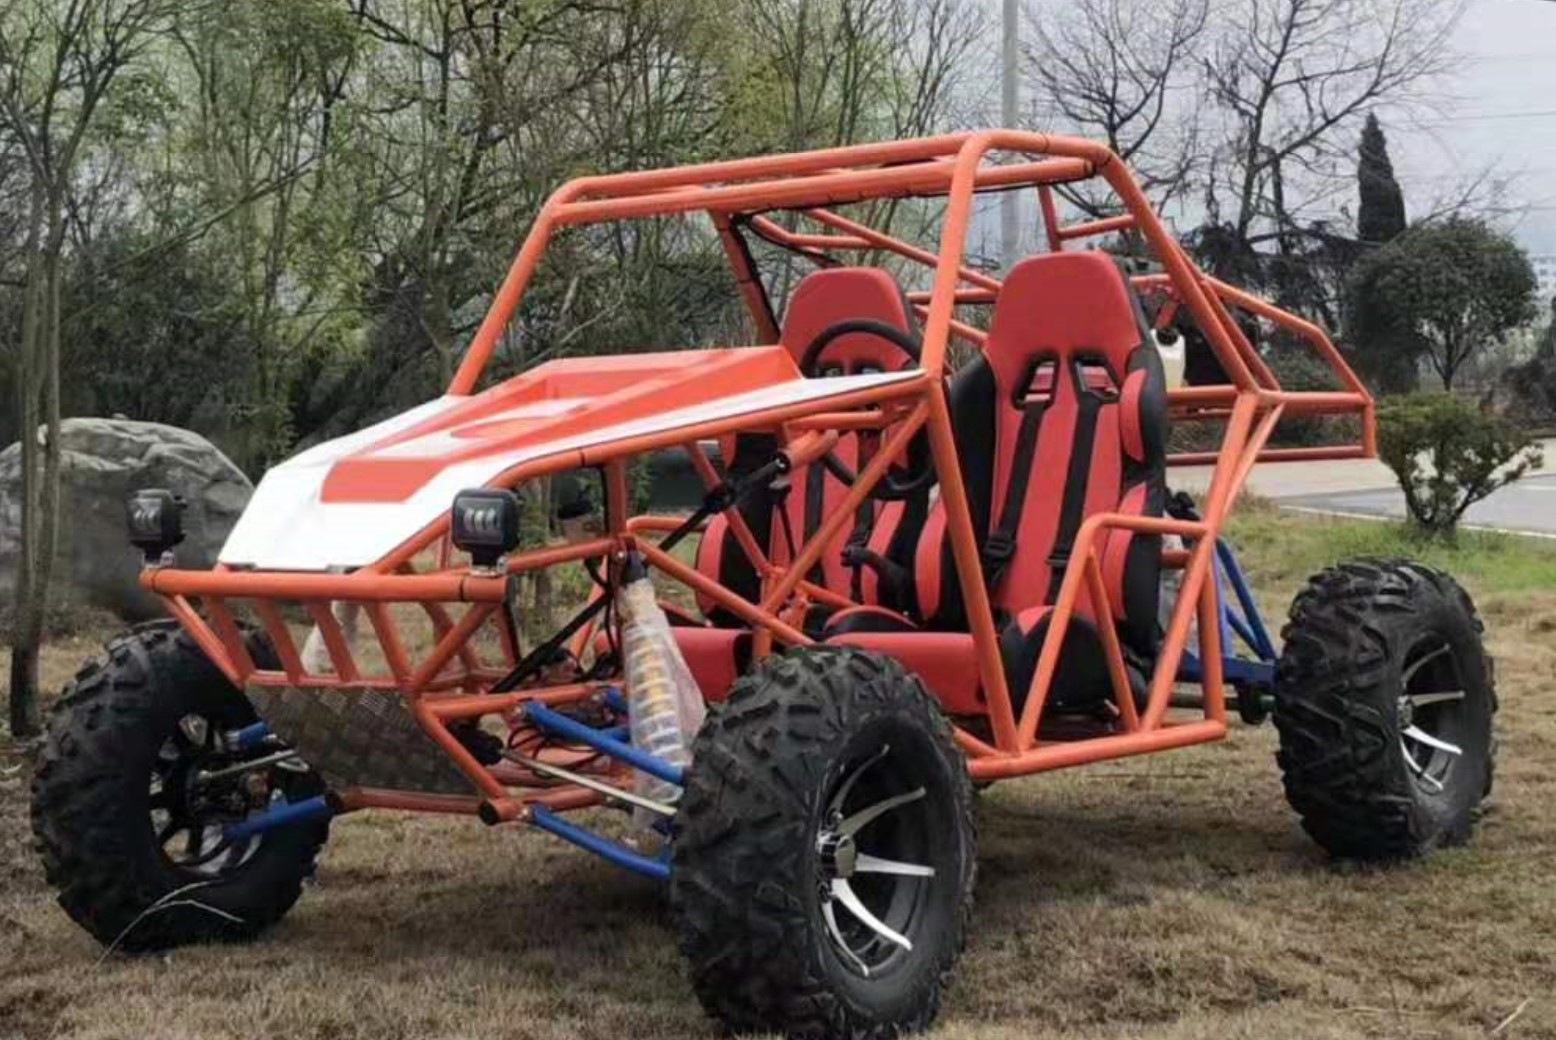 2 seater off road buggy